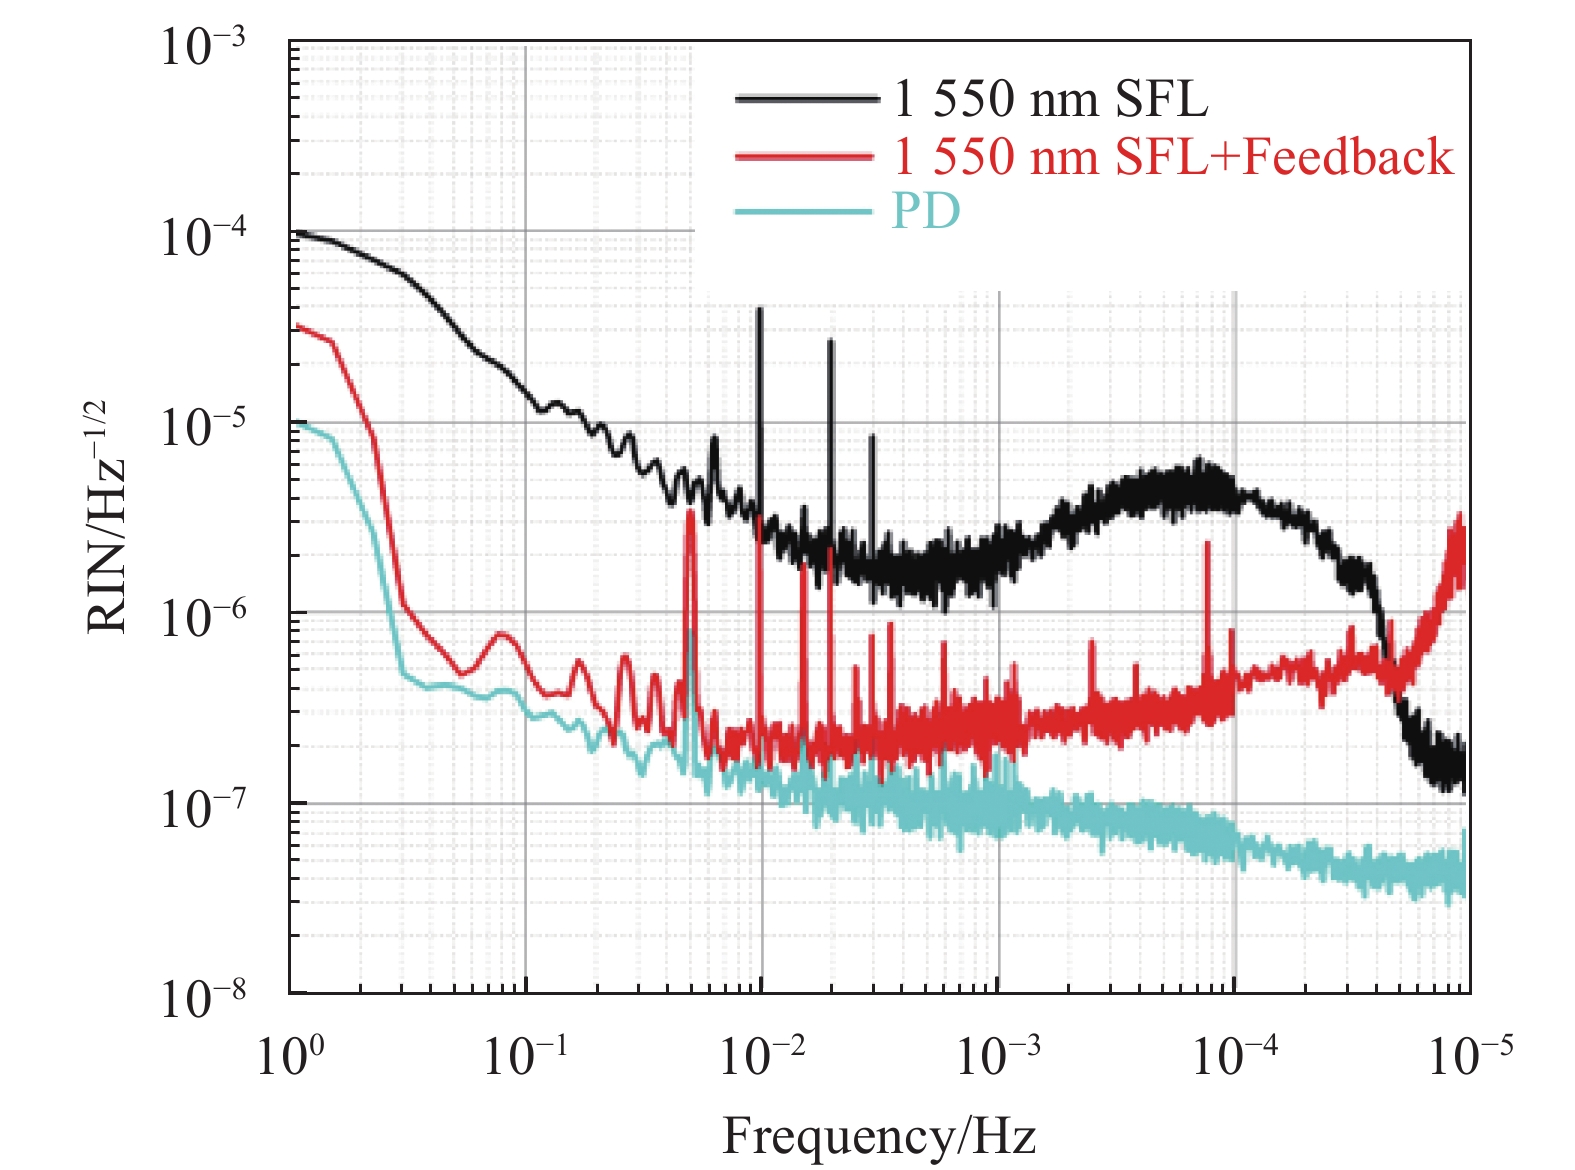 RIN of 1 550 nm SFL with and without feedback control loop